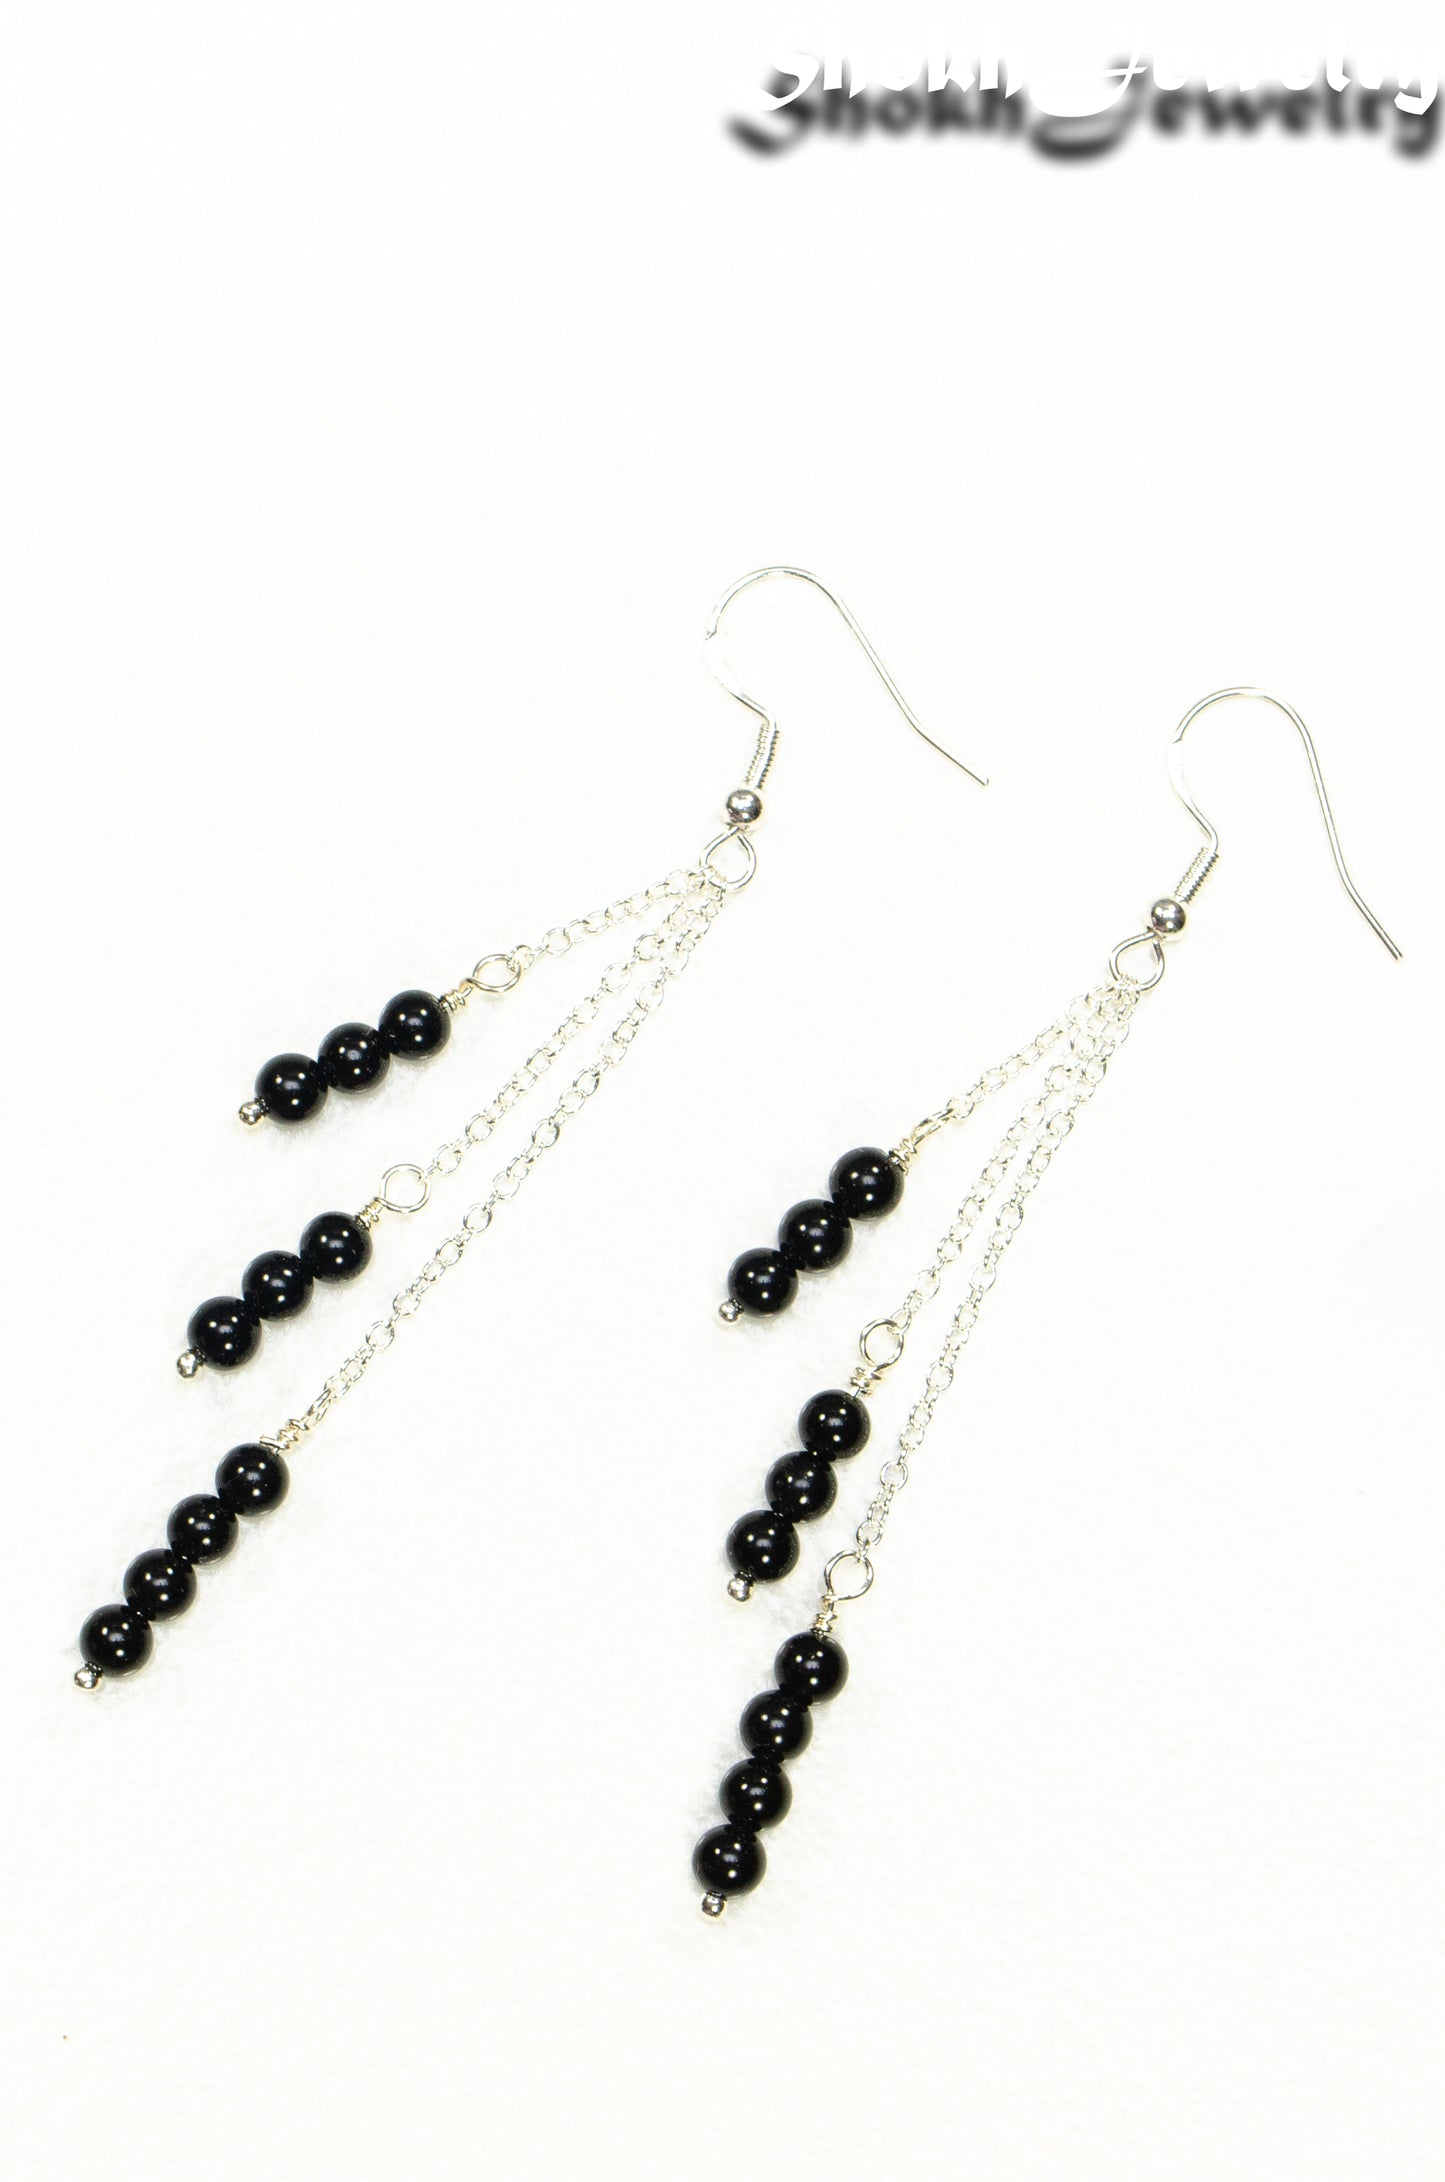 Top view of Silver Plated Chain and Black Onyx Stone Earrings.